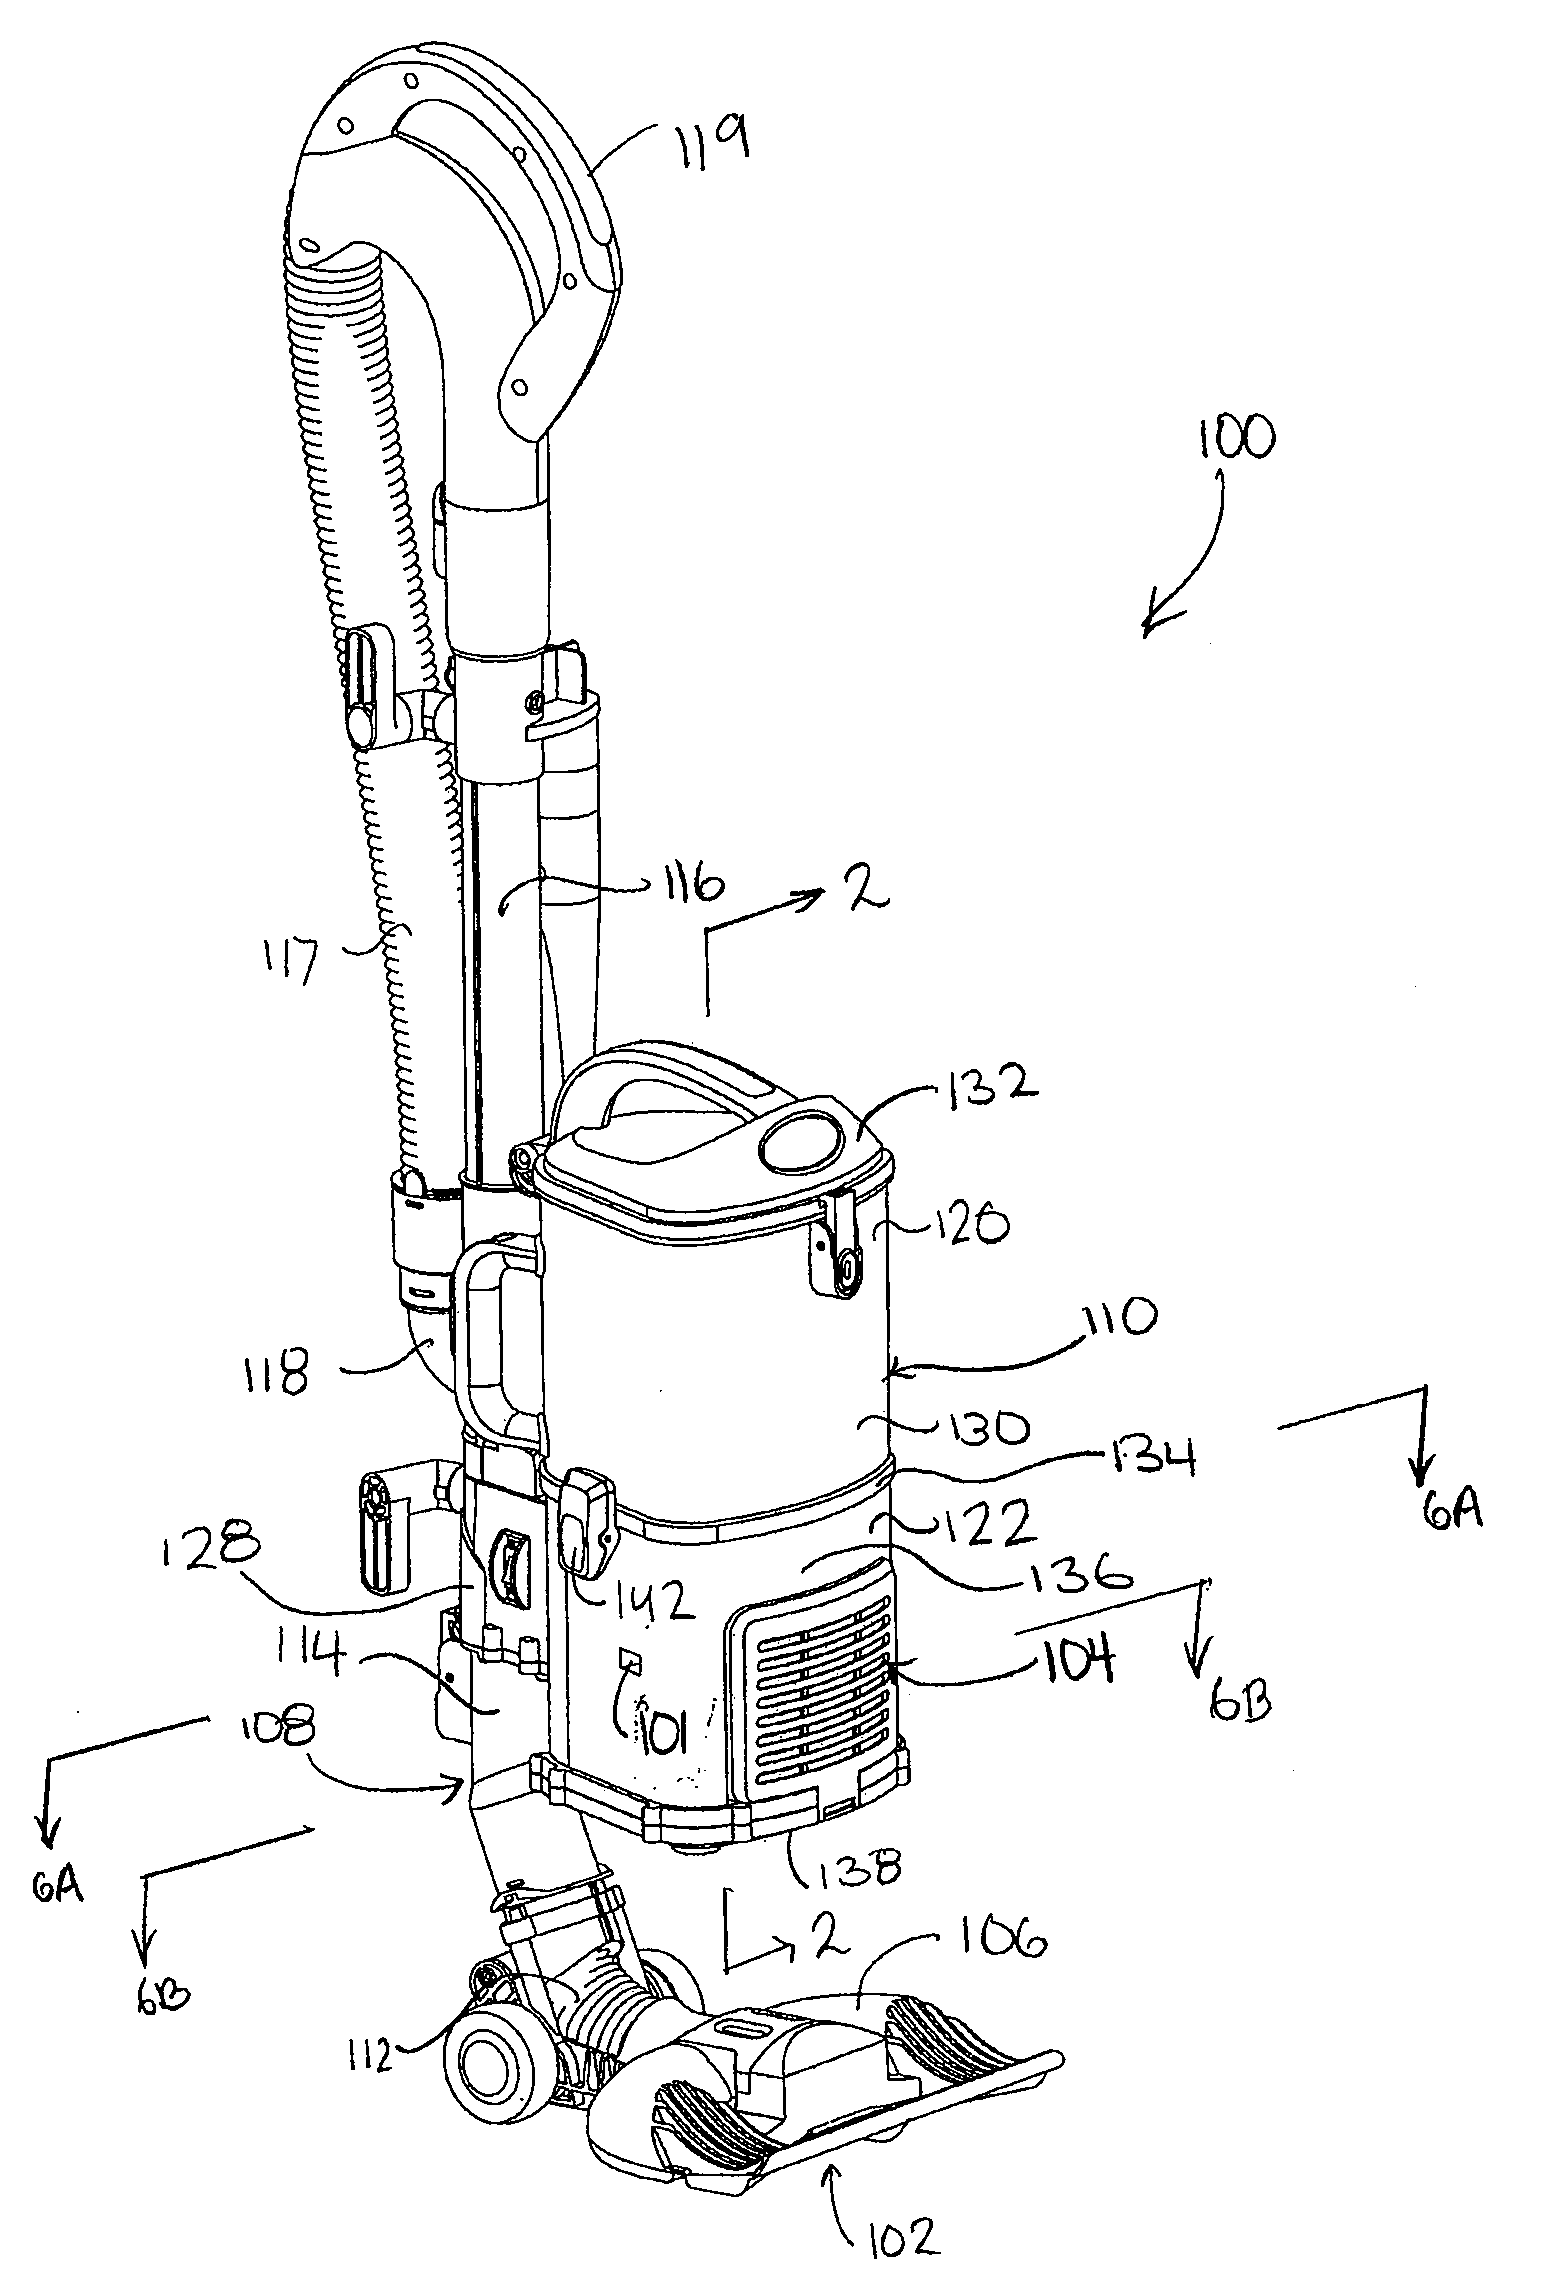 Suction motor housing for an upright surface cleaning apparatus